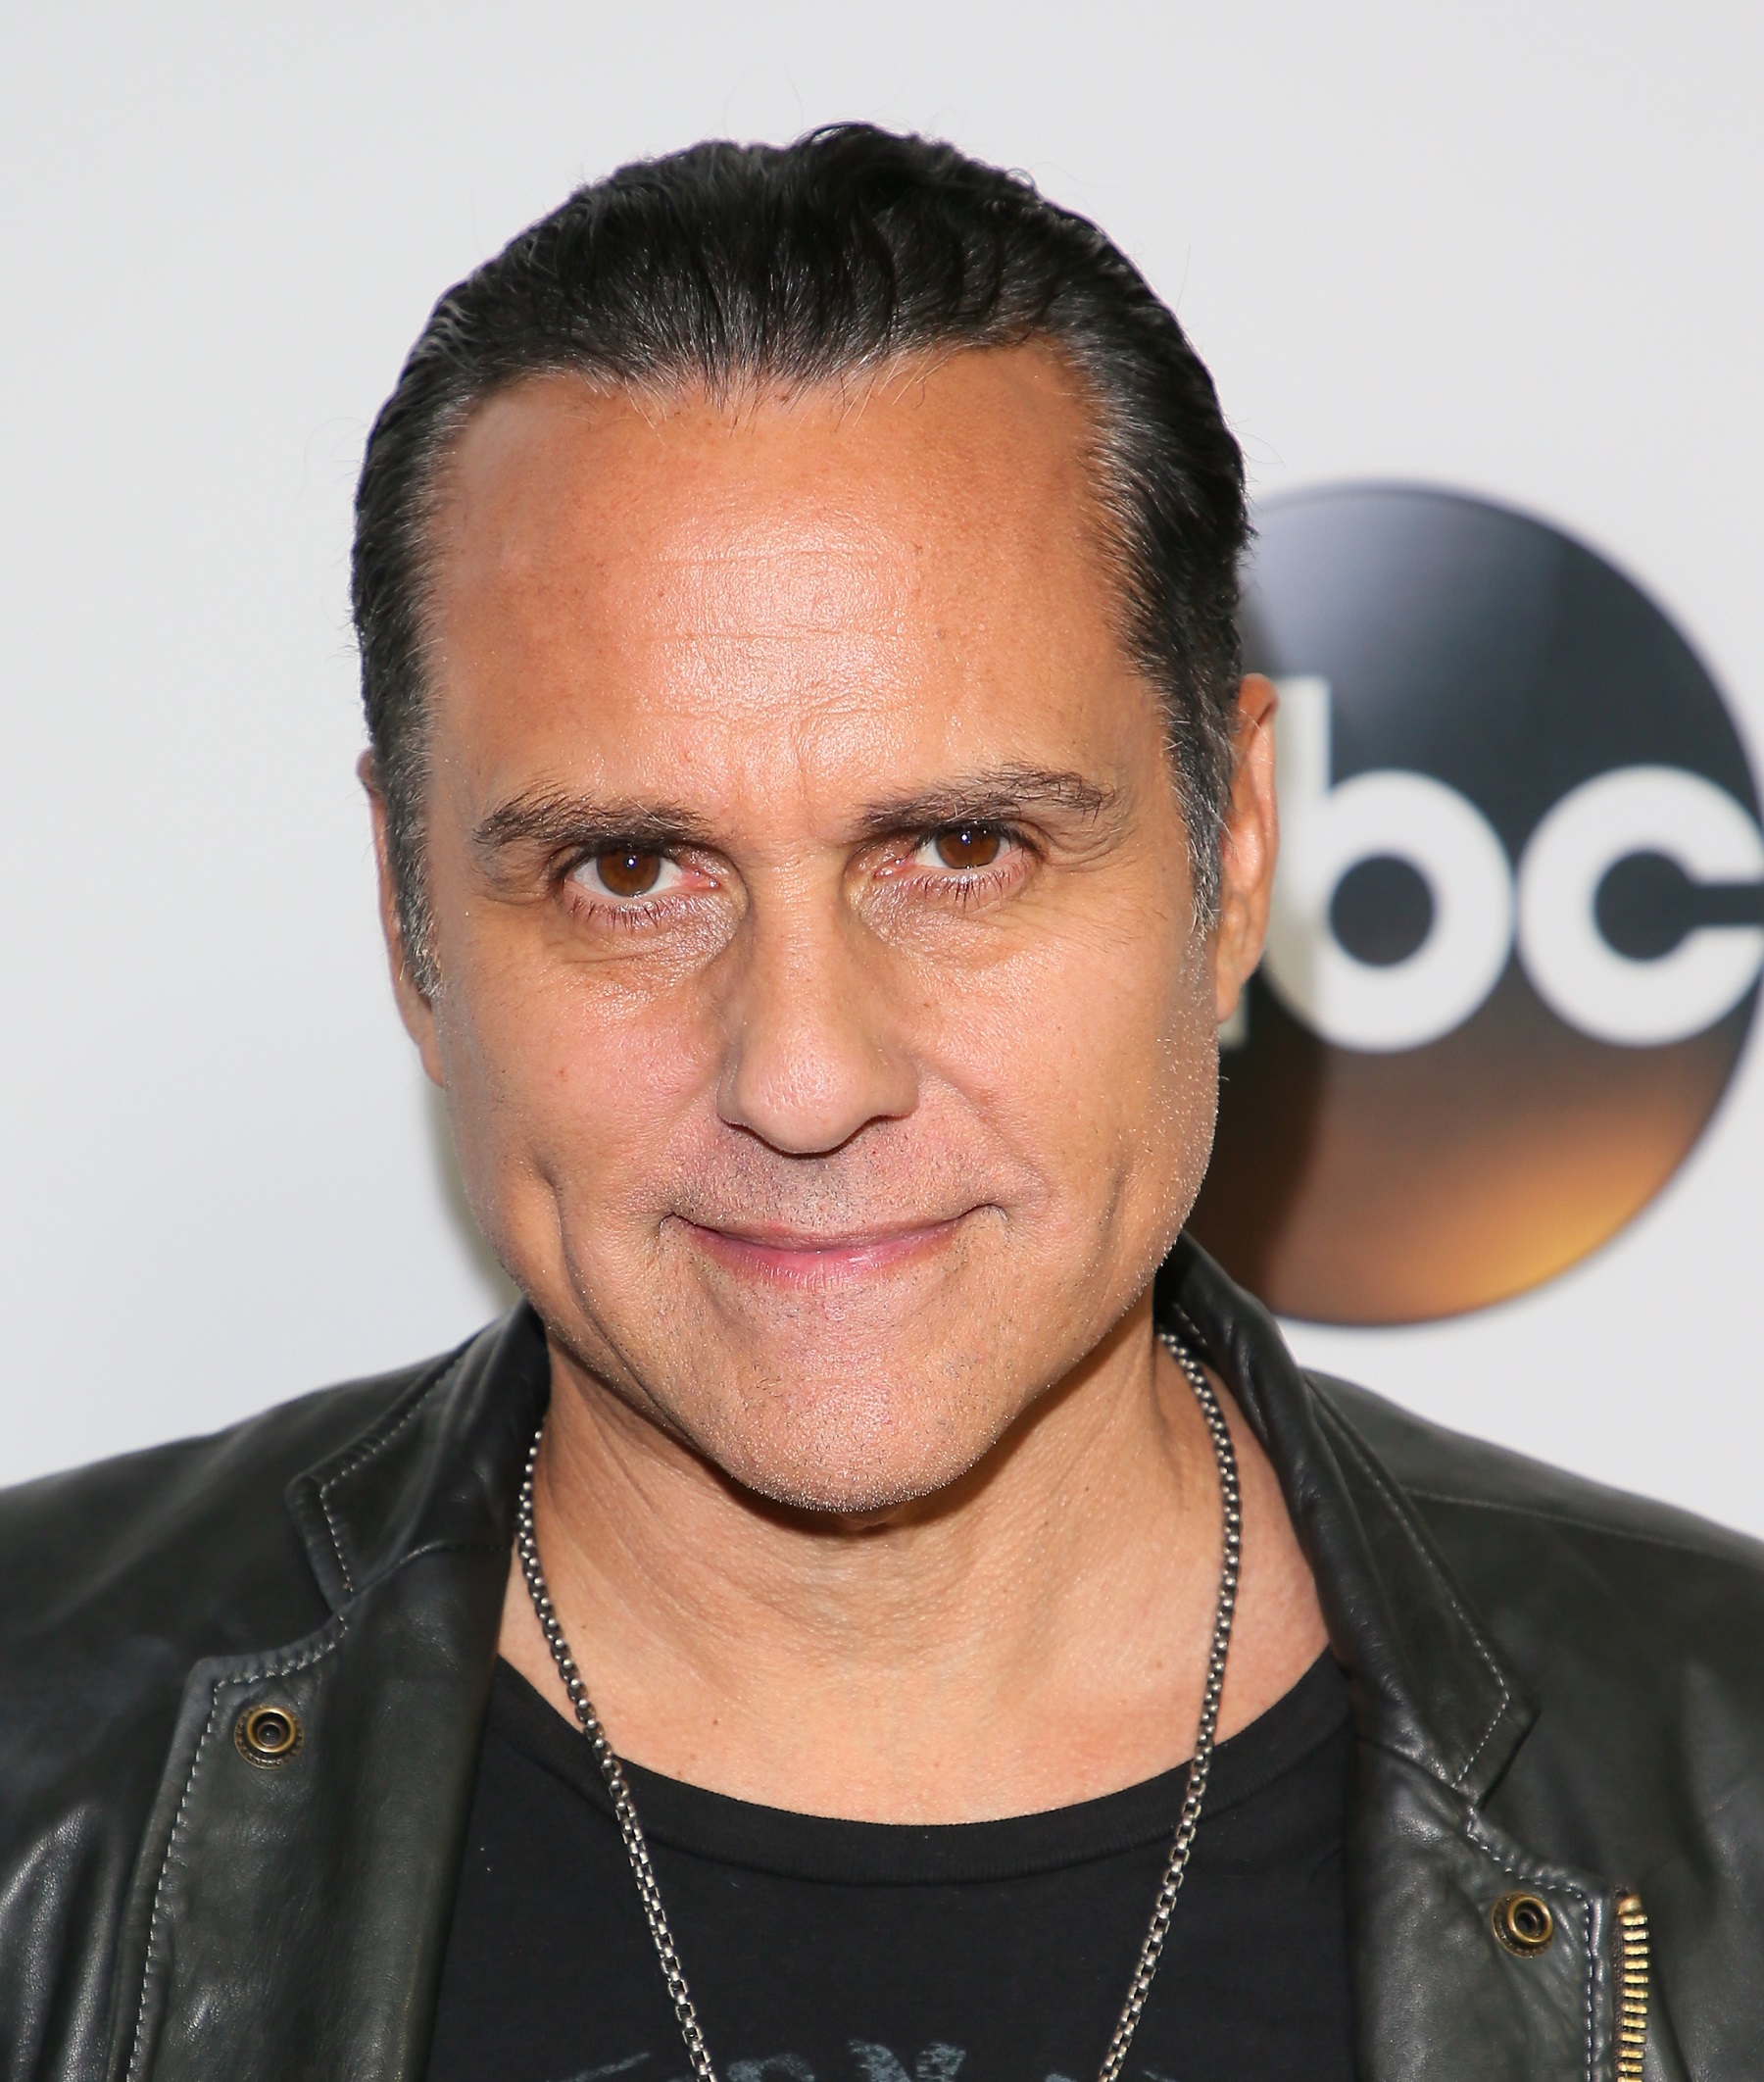 General Hospital star Maurice Benard is pictured here in a black leather jacket and a black t-shirt against an ABC step-and-repeat